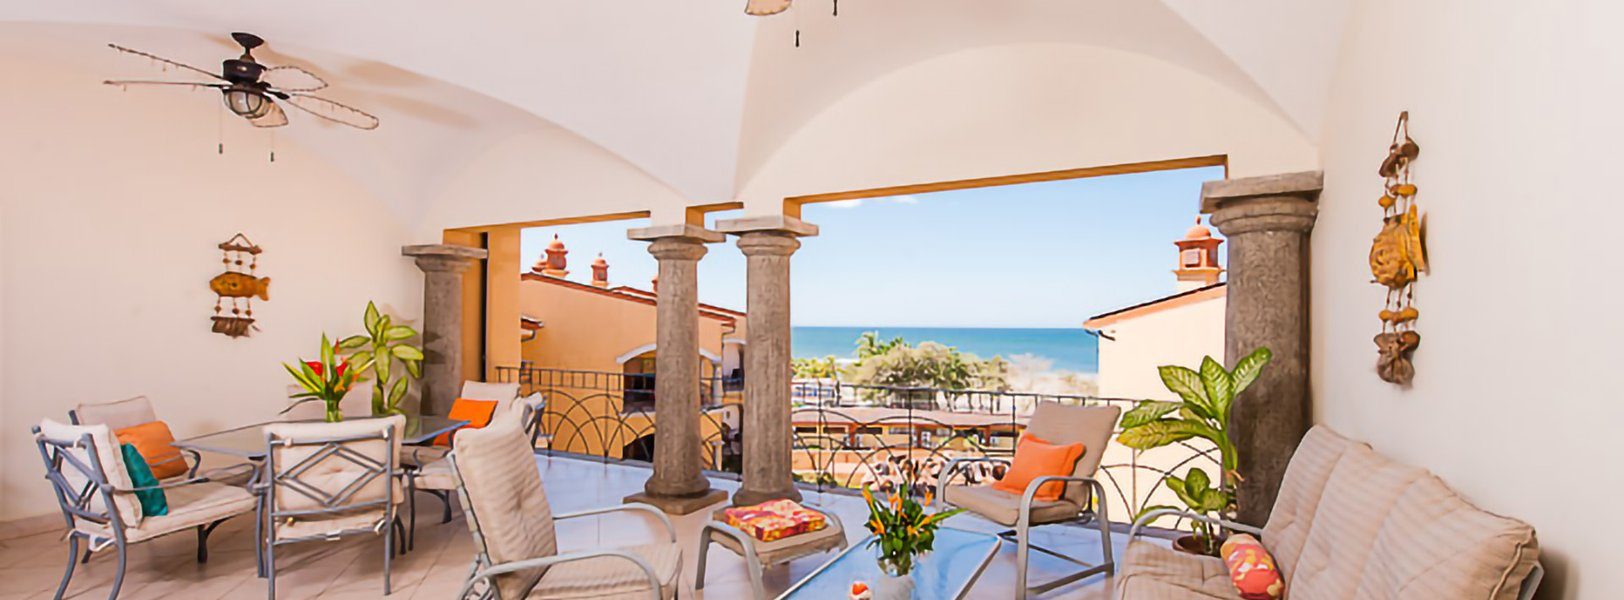 This stunning luxury penthouse is one of the finest places to stay in Tamarindo.